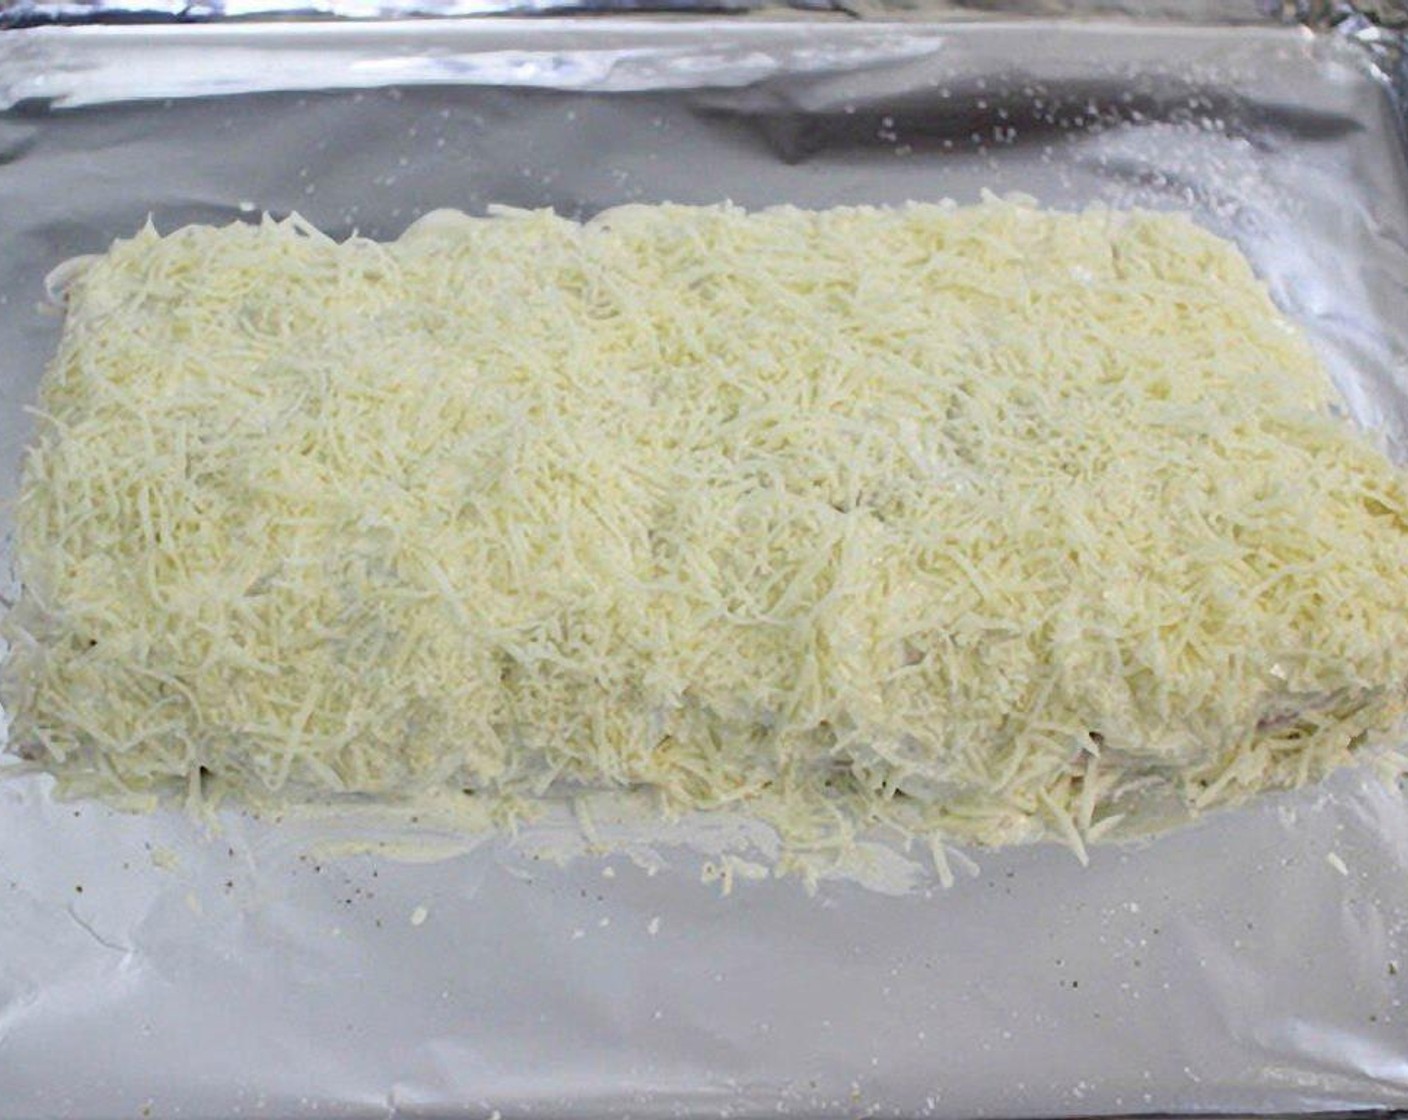 step 6 Top with the Shredded Parmesan Cheese (1/4 cup) and Shredded Mozzarella Cheese (1/3 cup).